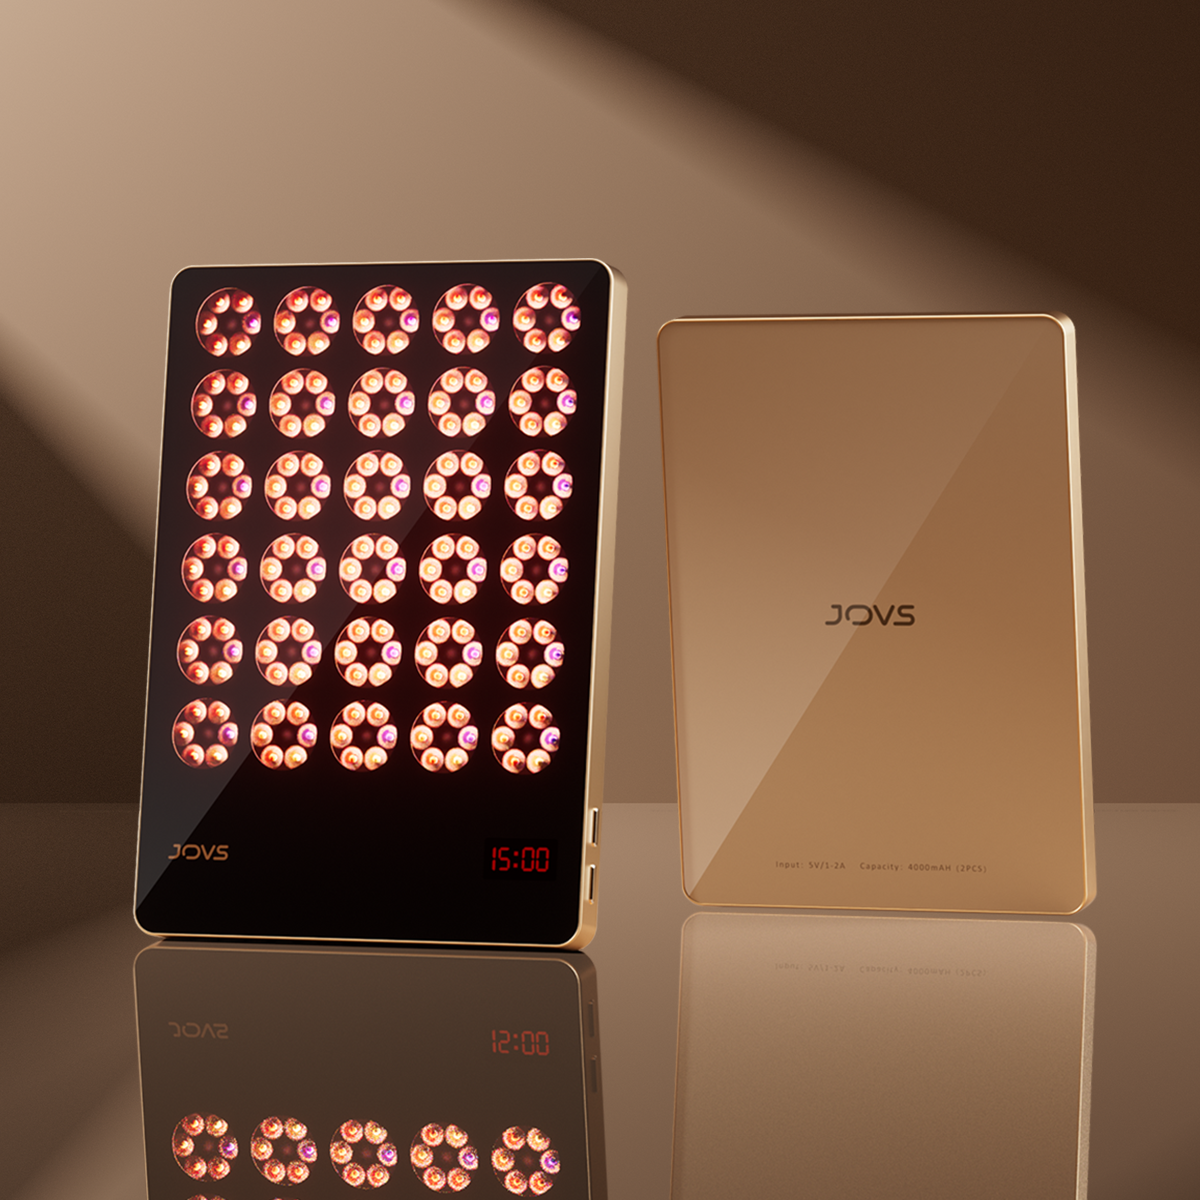 JOVS LED light therapy device displaying time, reflecting modern design and advanced skincare technology.